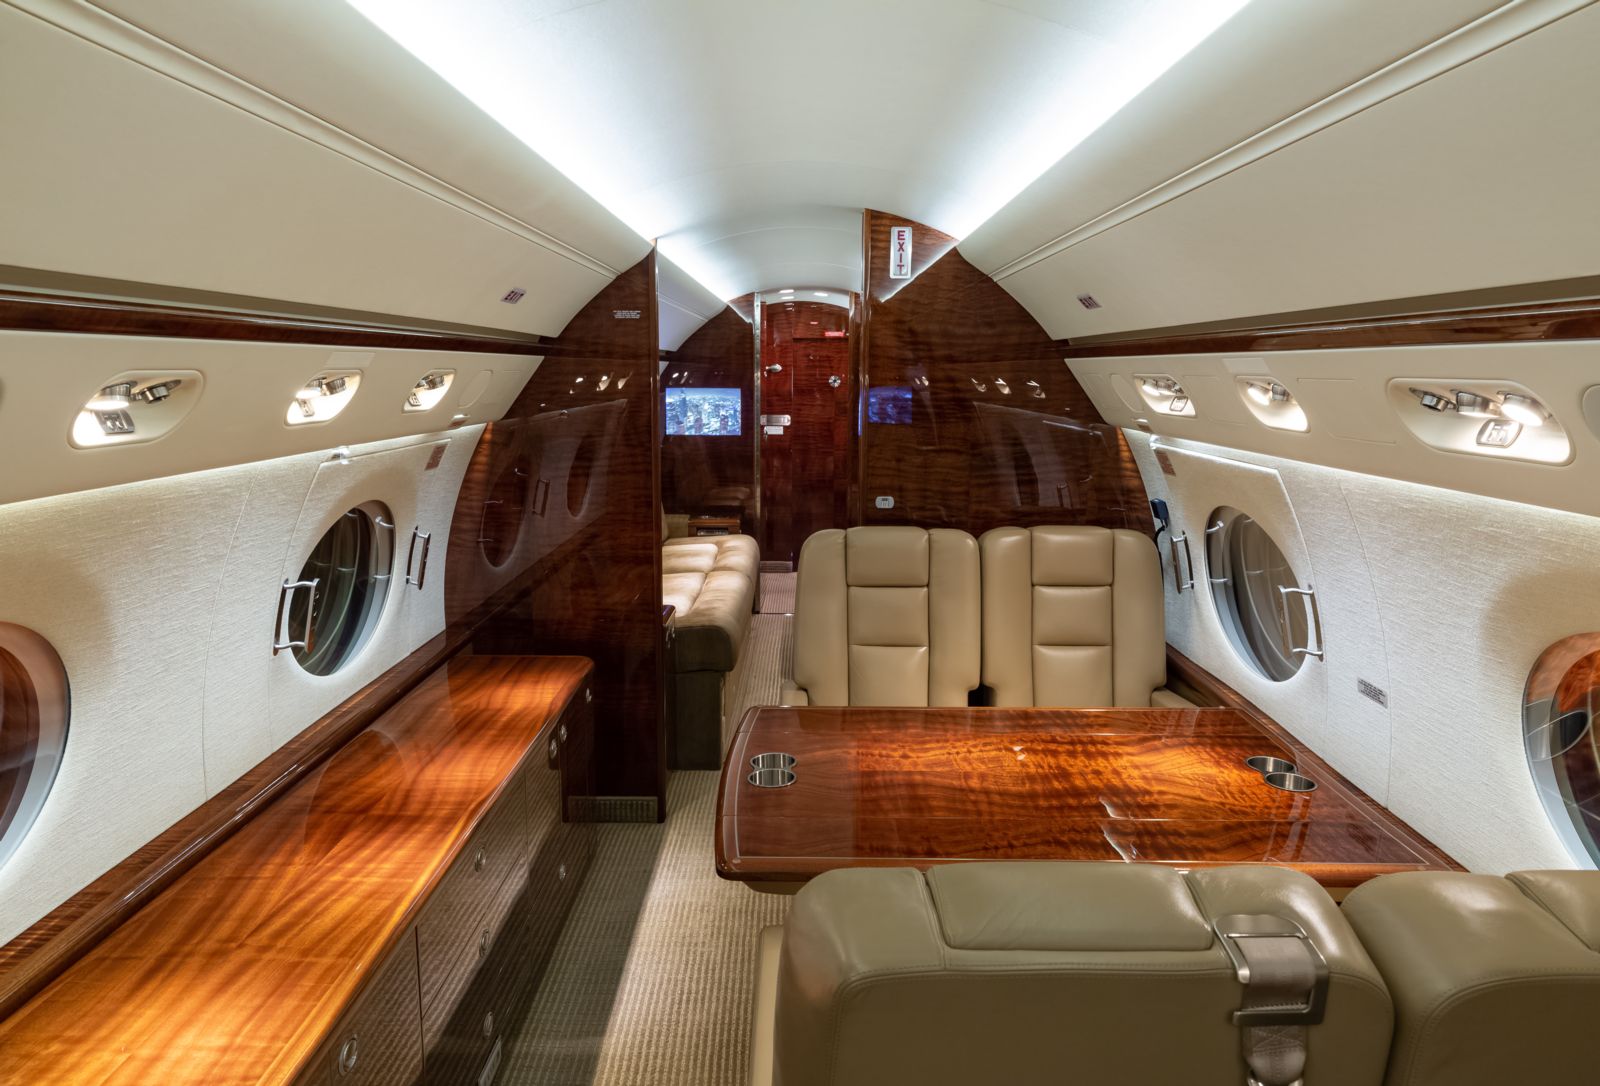 Gulfstream G550  S/N 5441 for sale | gallery image: /userfiles/images/G550_sn5441/bfp_1163.jpg